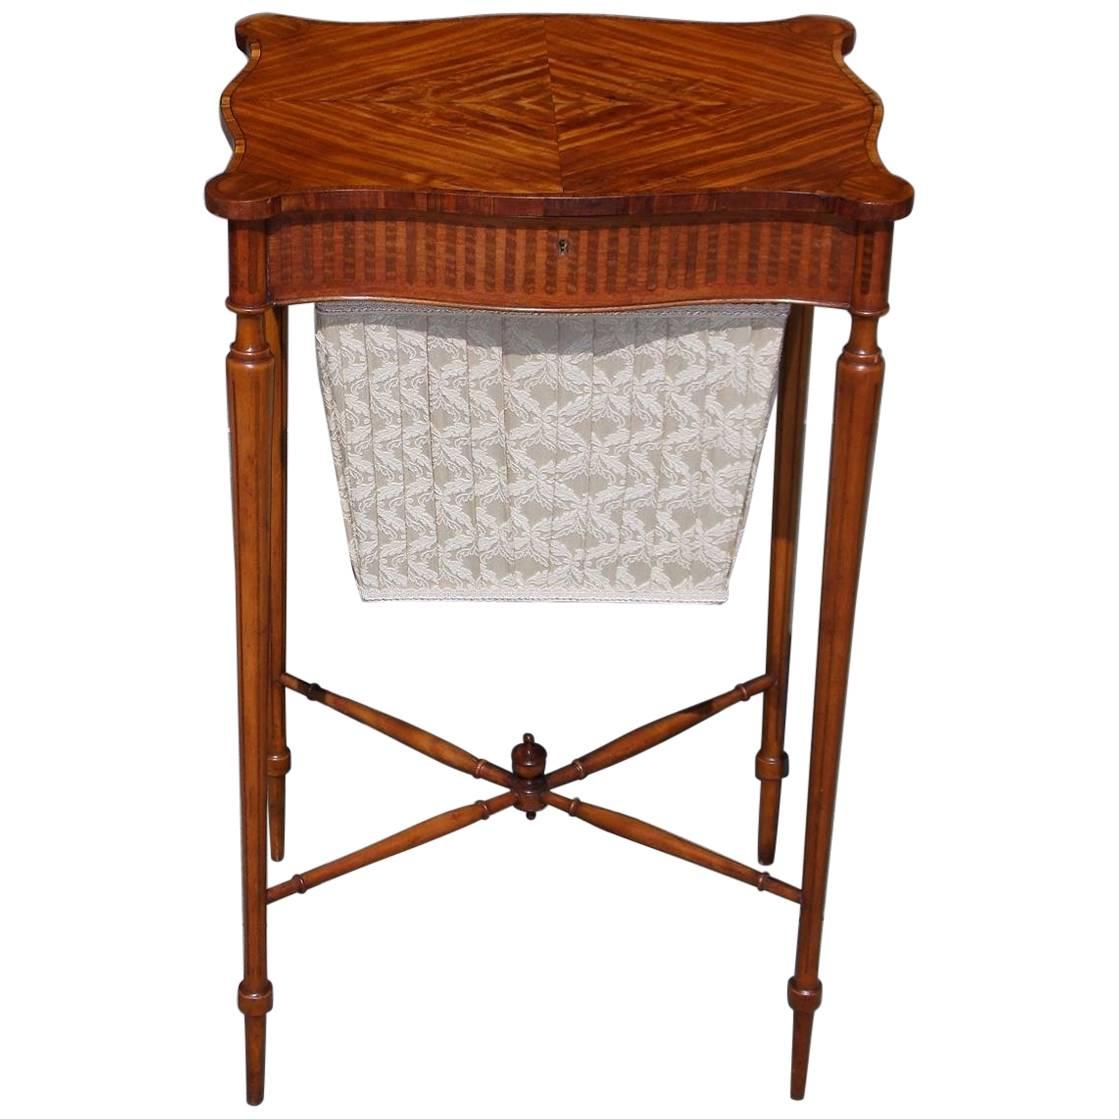 English Regency Satinwood Outset Corner Hinged Sewing Stand, Circa 1800 For Sale